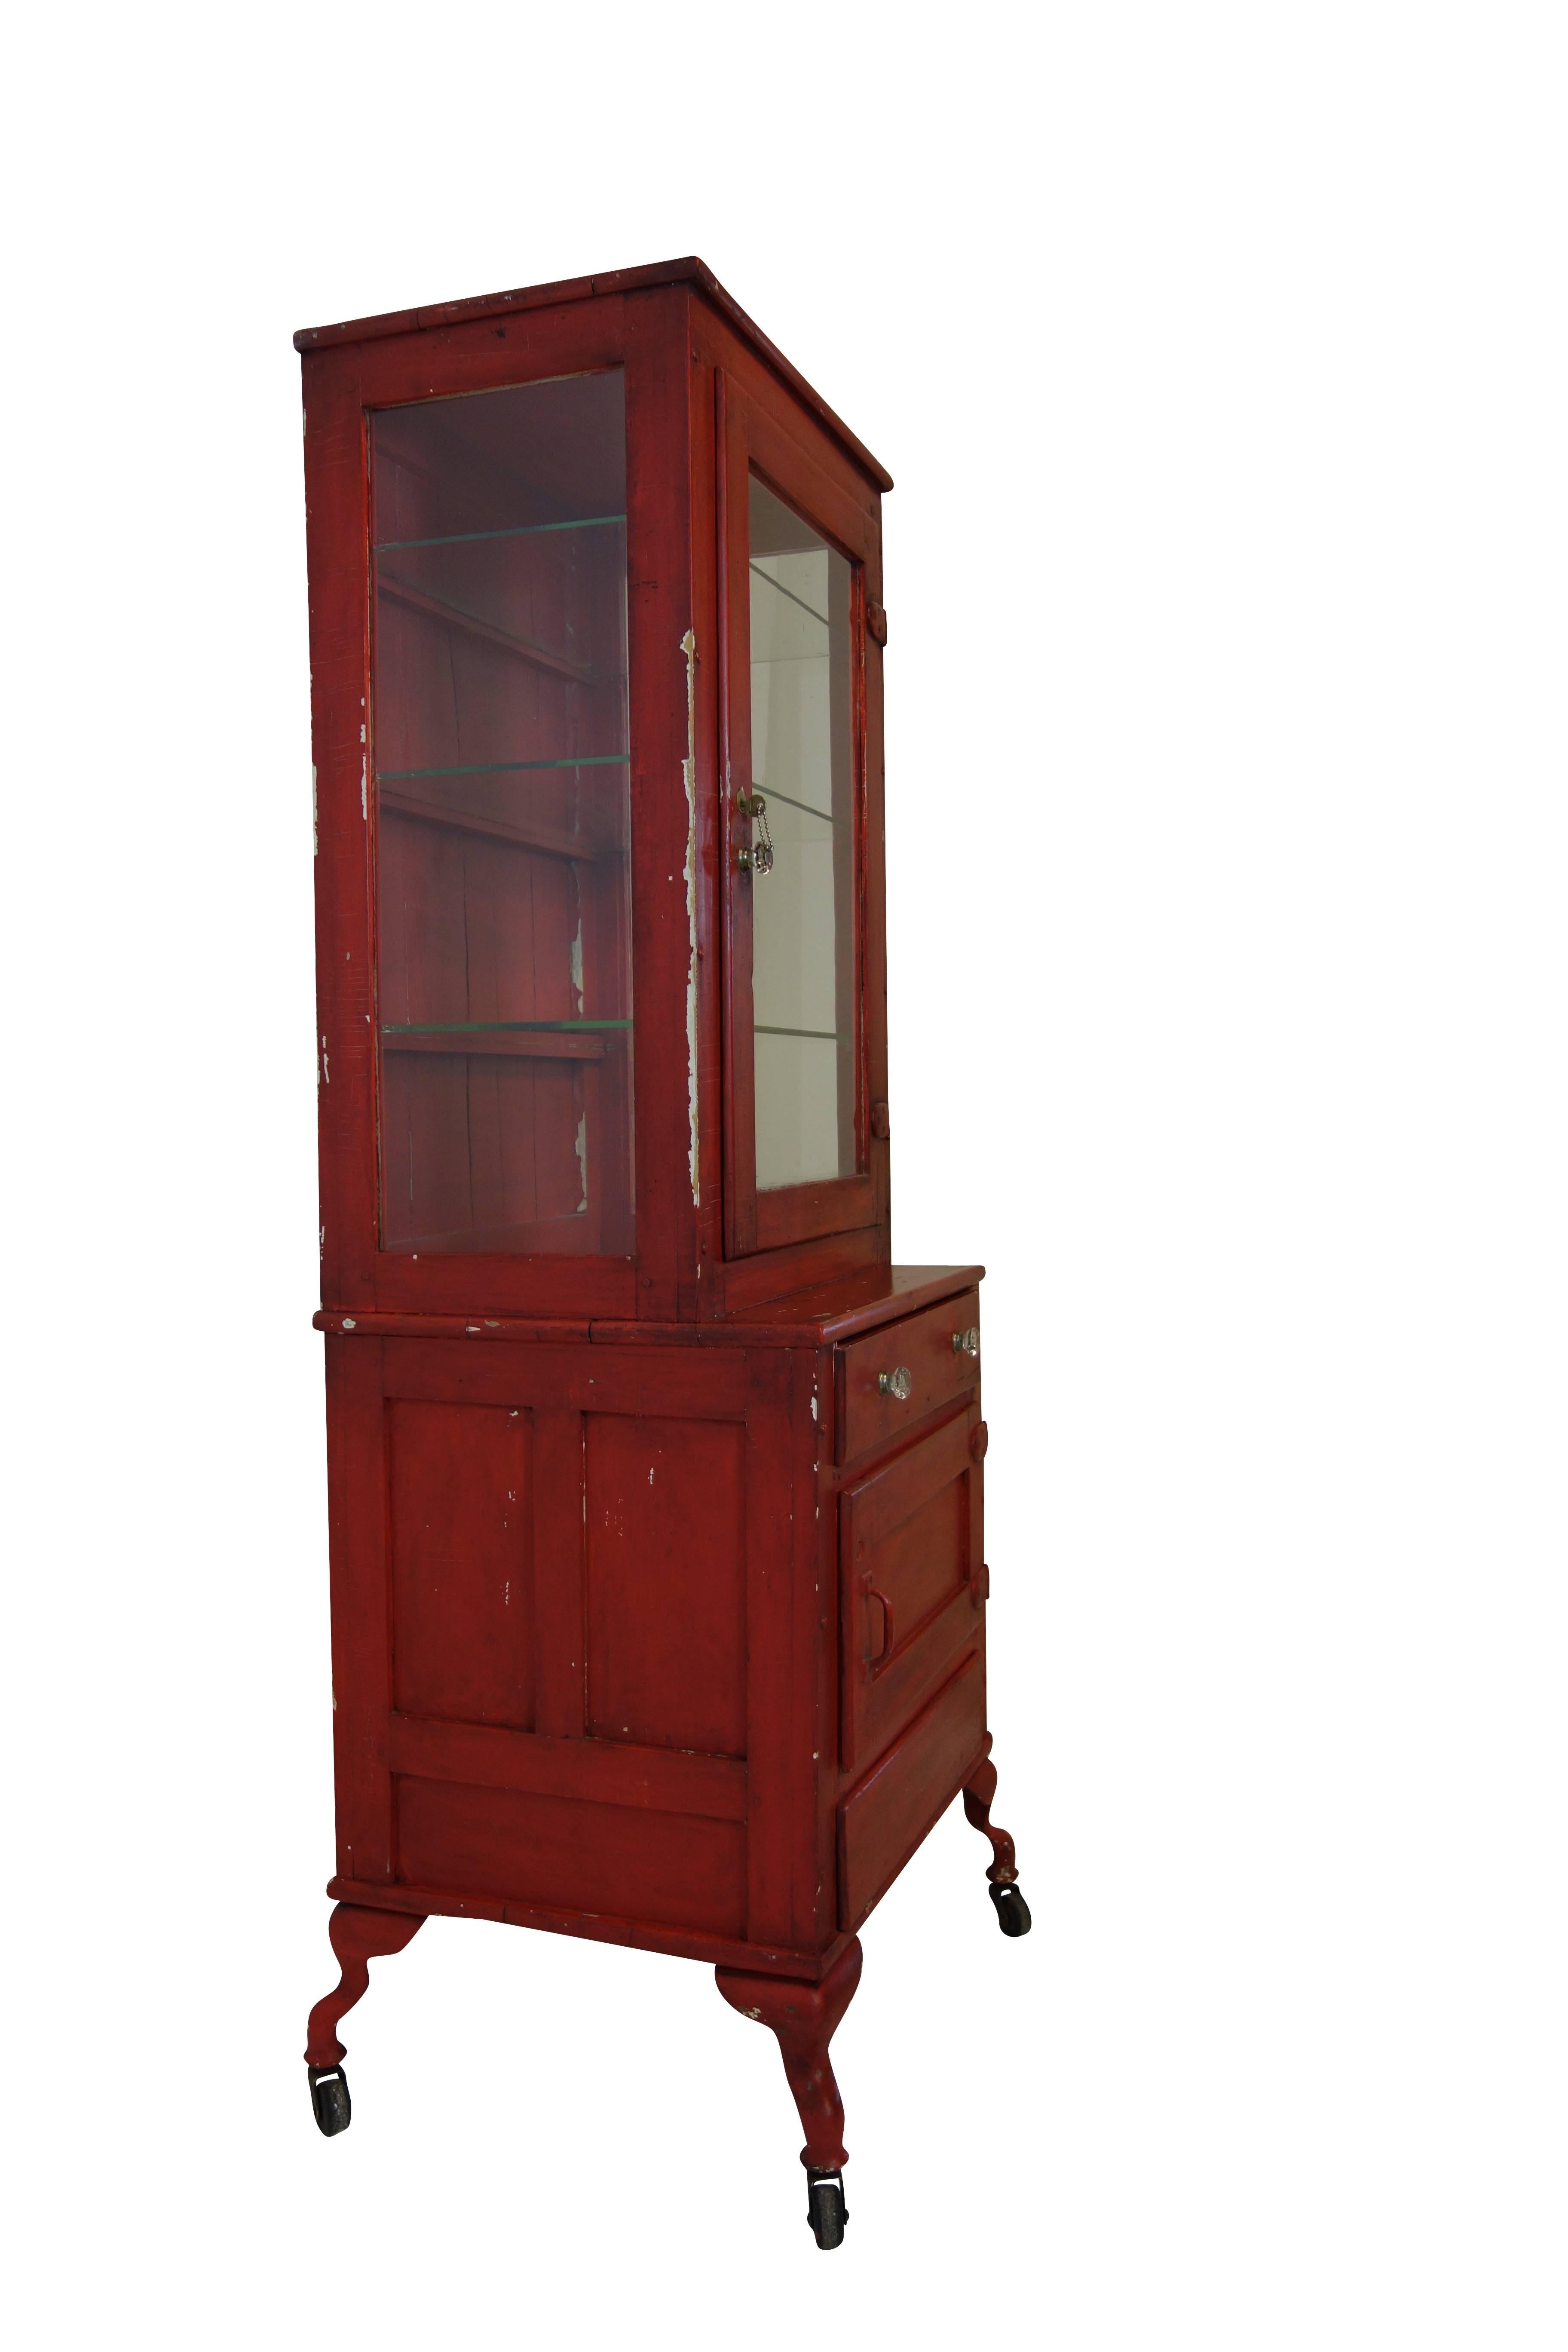 Other Red Painted Medical Cabinet For Sale